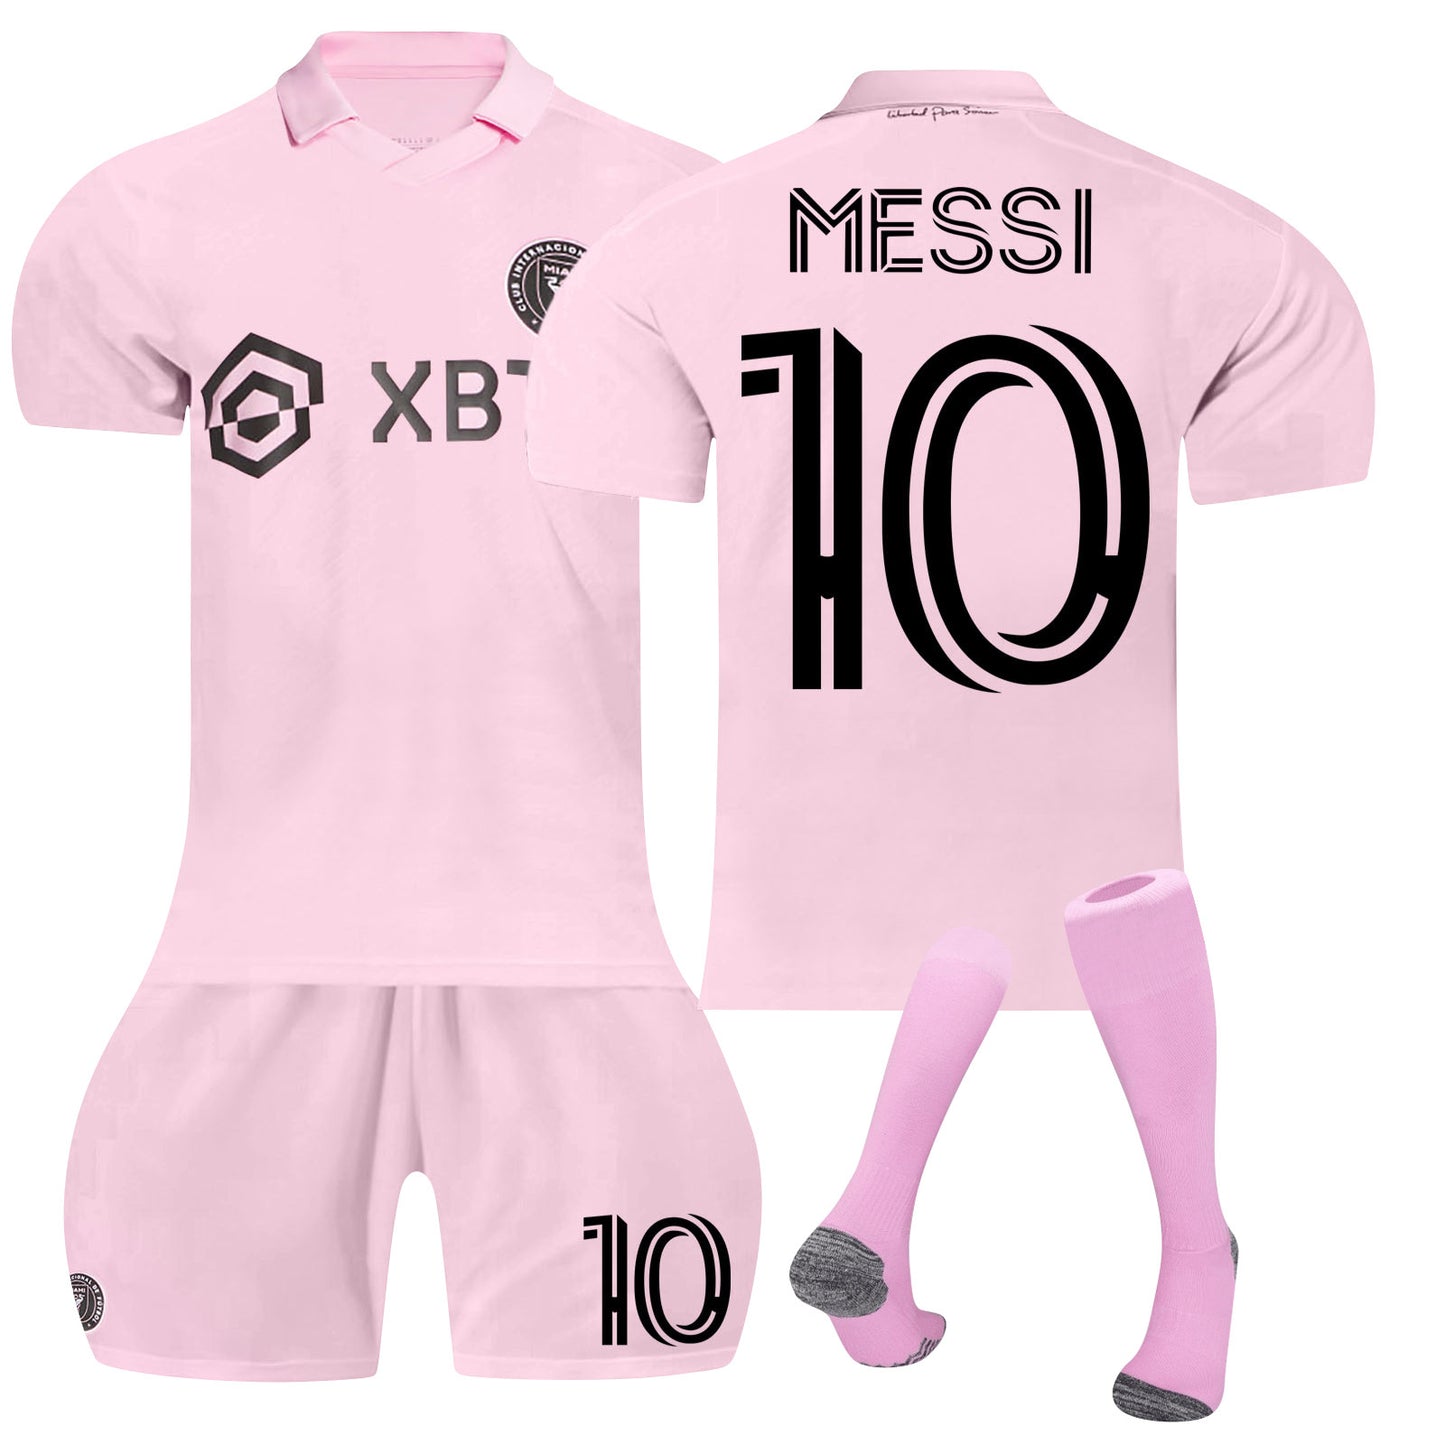 Inter Miami Messi No10 Football Kit Home Match Football Jersey Tracksuit Shirts Shorts And Socks Set For Kids And Men Kids Football Jersey Set Jerseys Sweat Suit Tracksuit Training Outfits